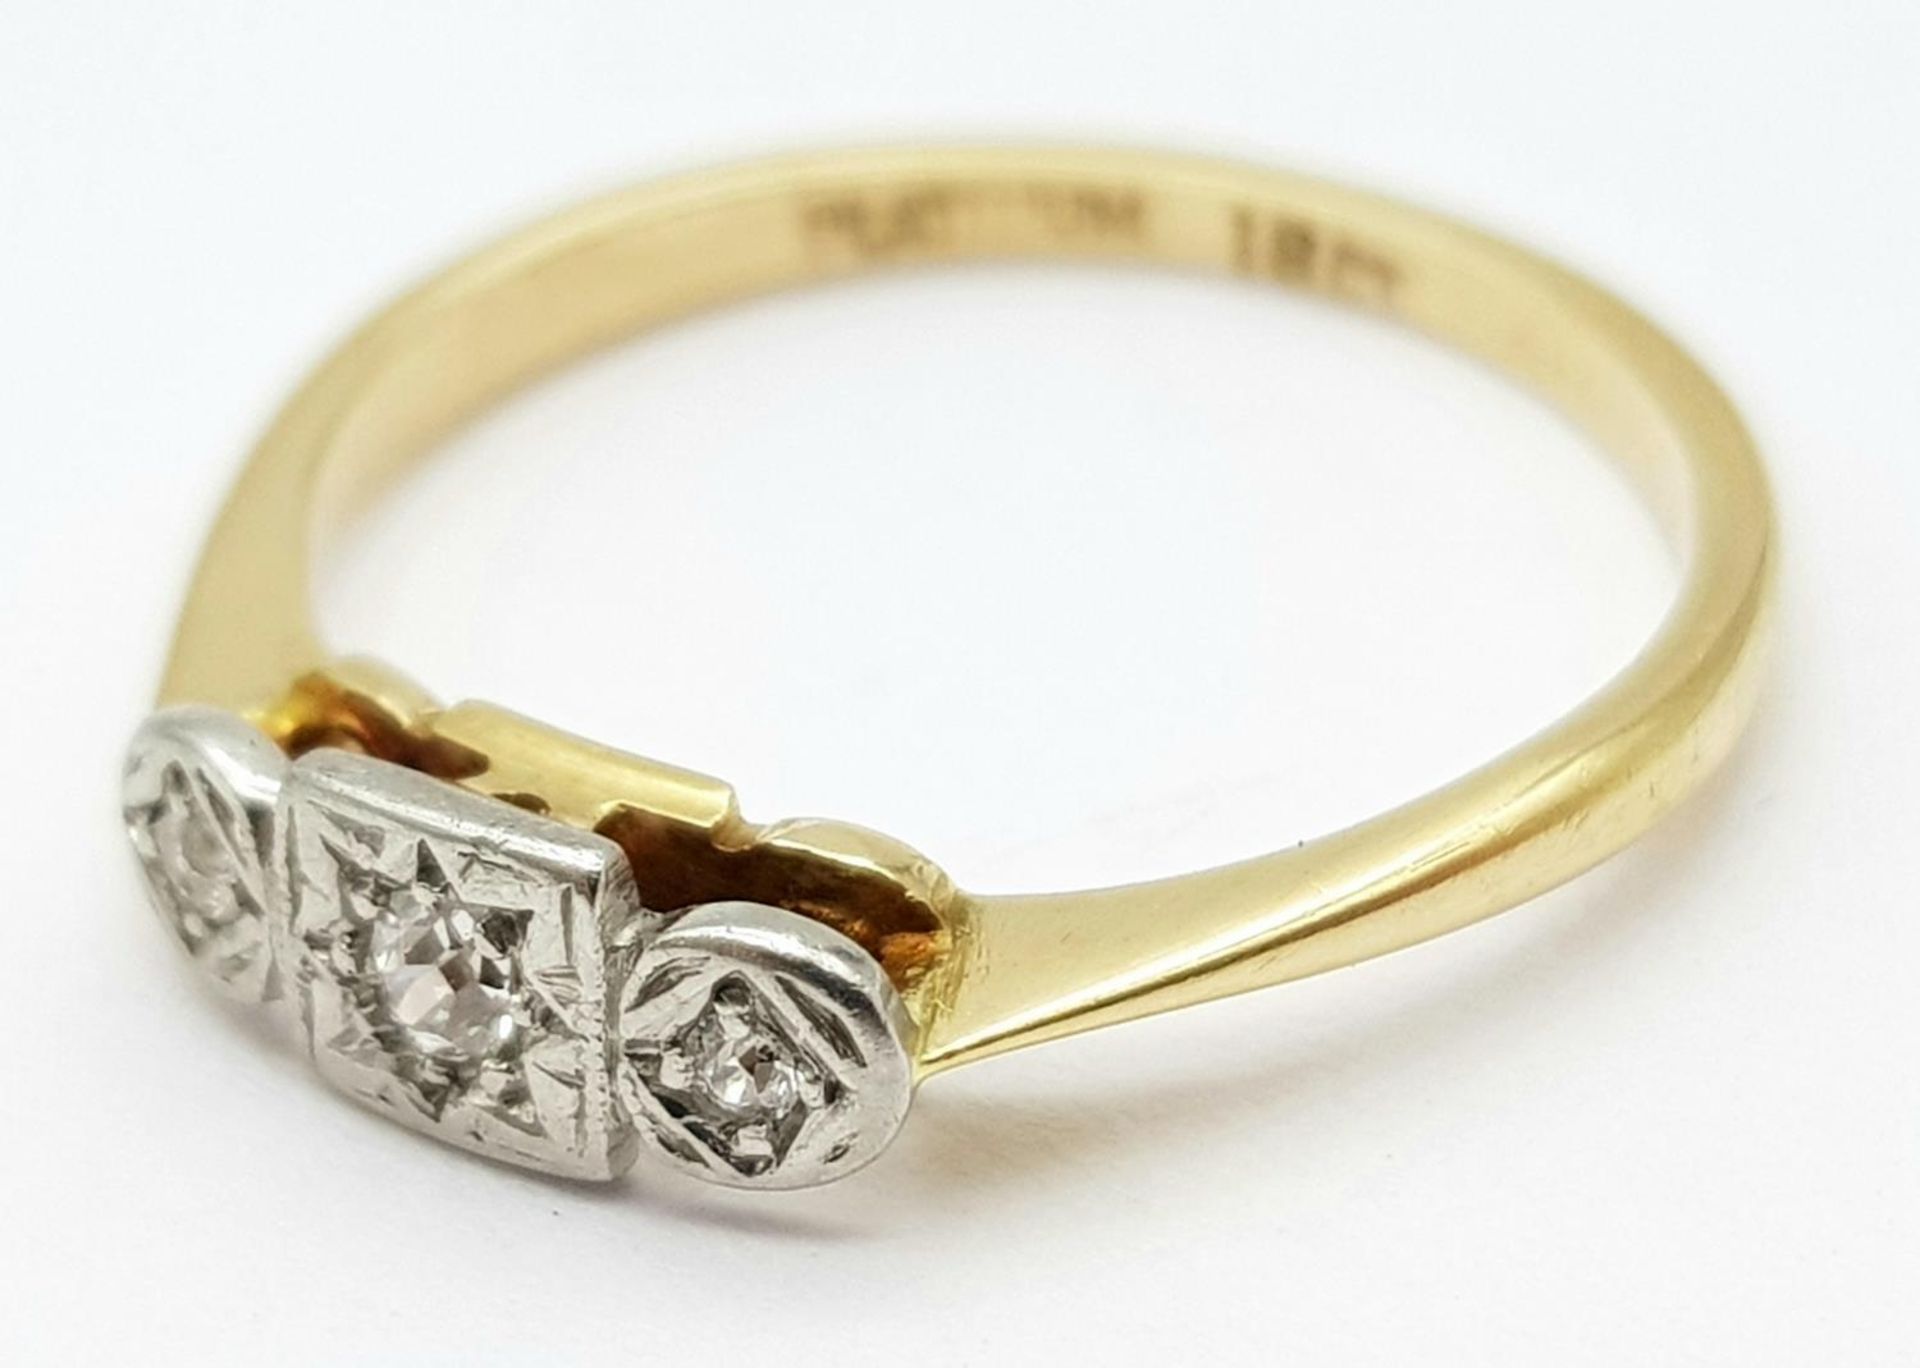 AN 18K YELLOW GOLD & PLATINUM VINTAGE DIAMOND RING. Size L, 2g total weight. Ref: SC 9051 - Image 3 of 5